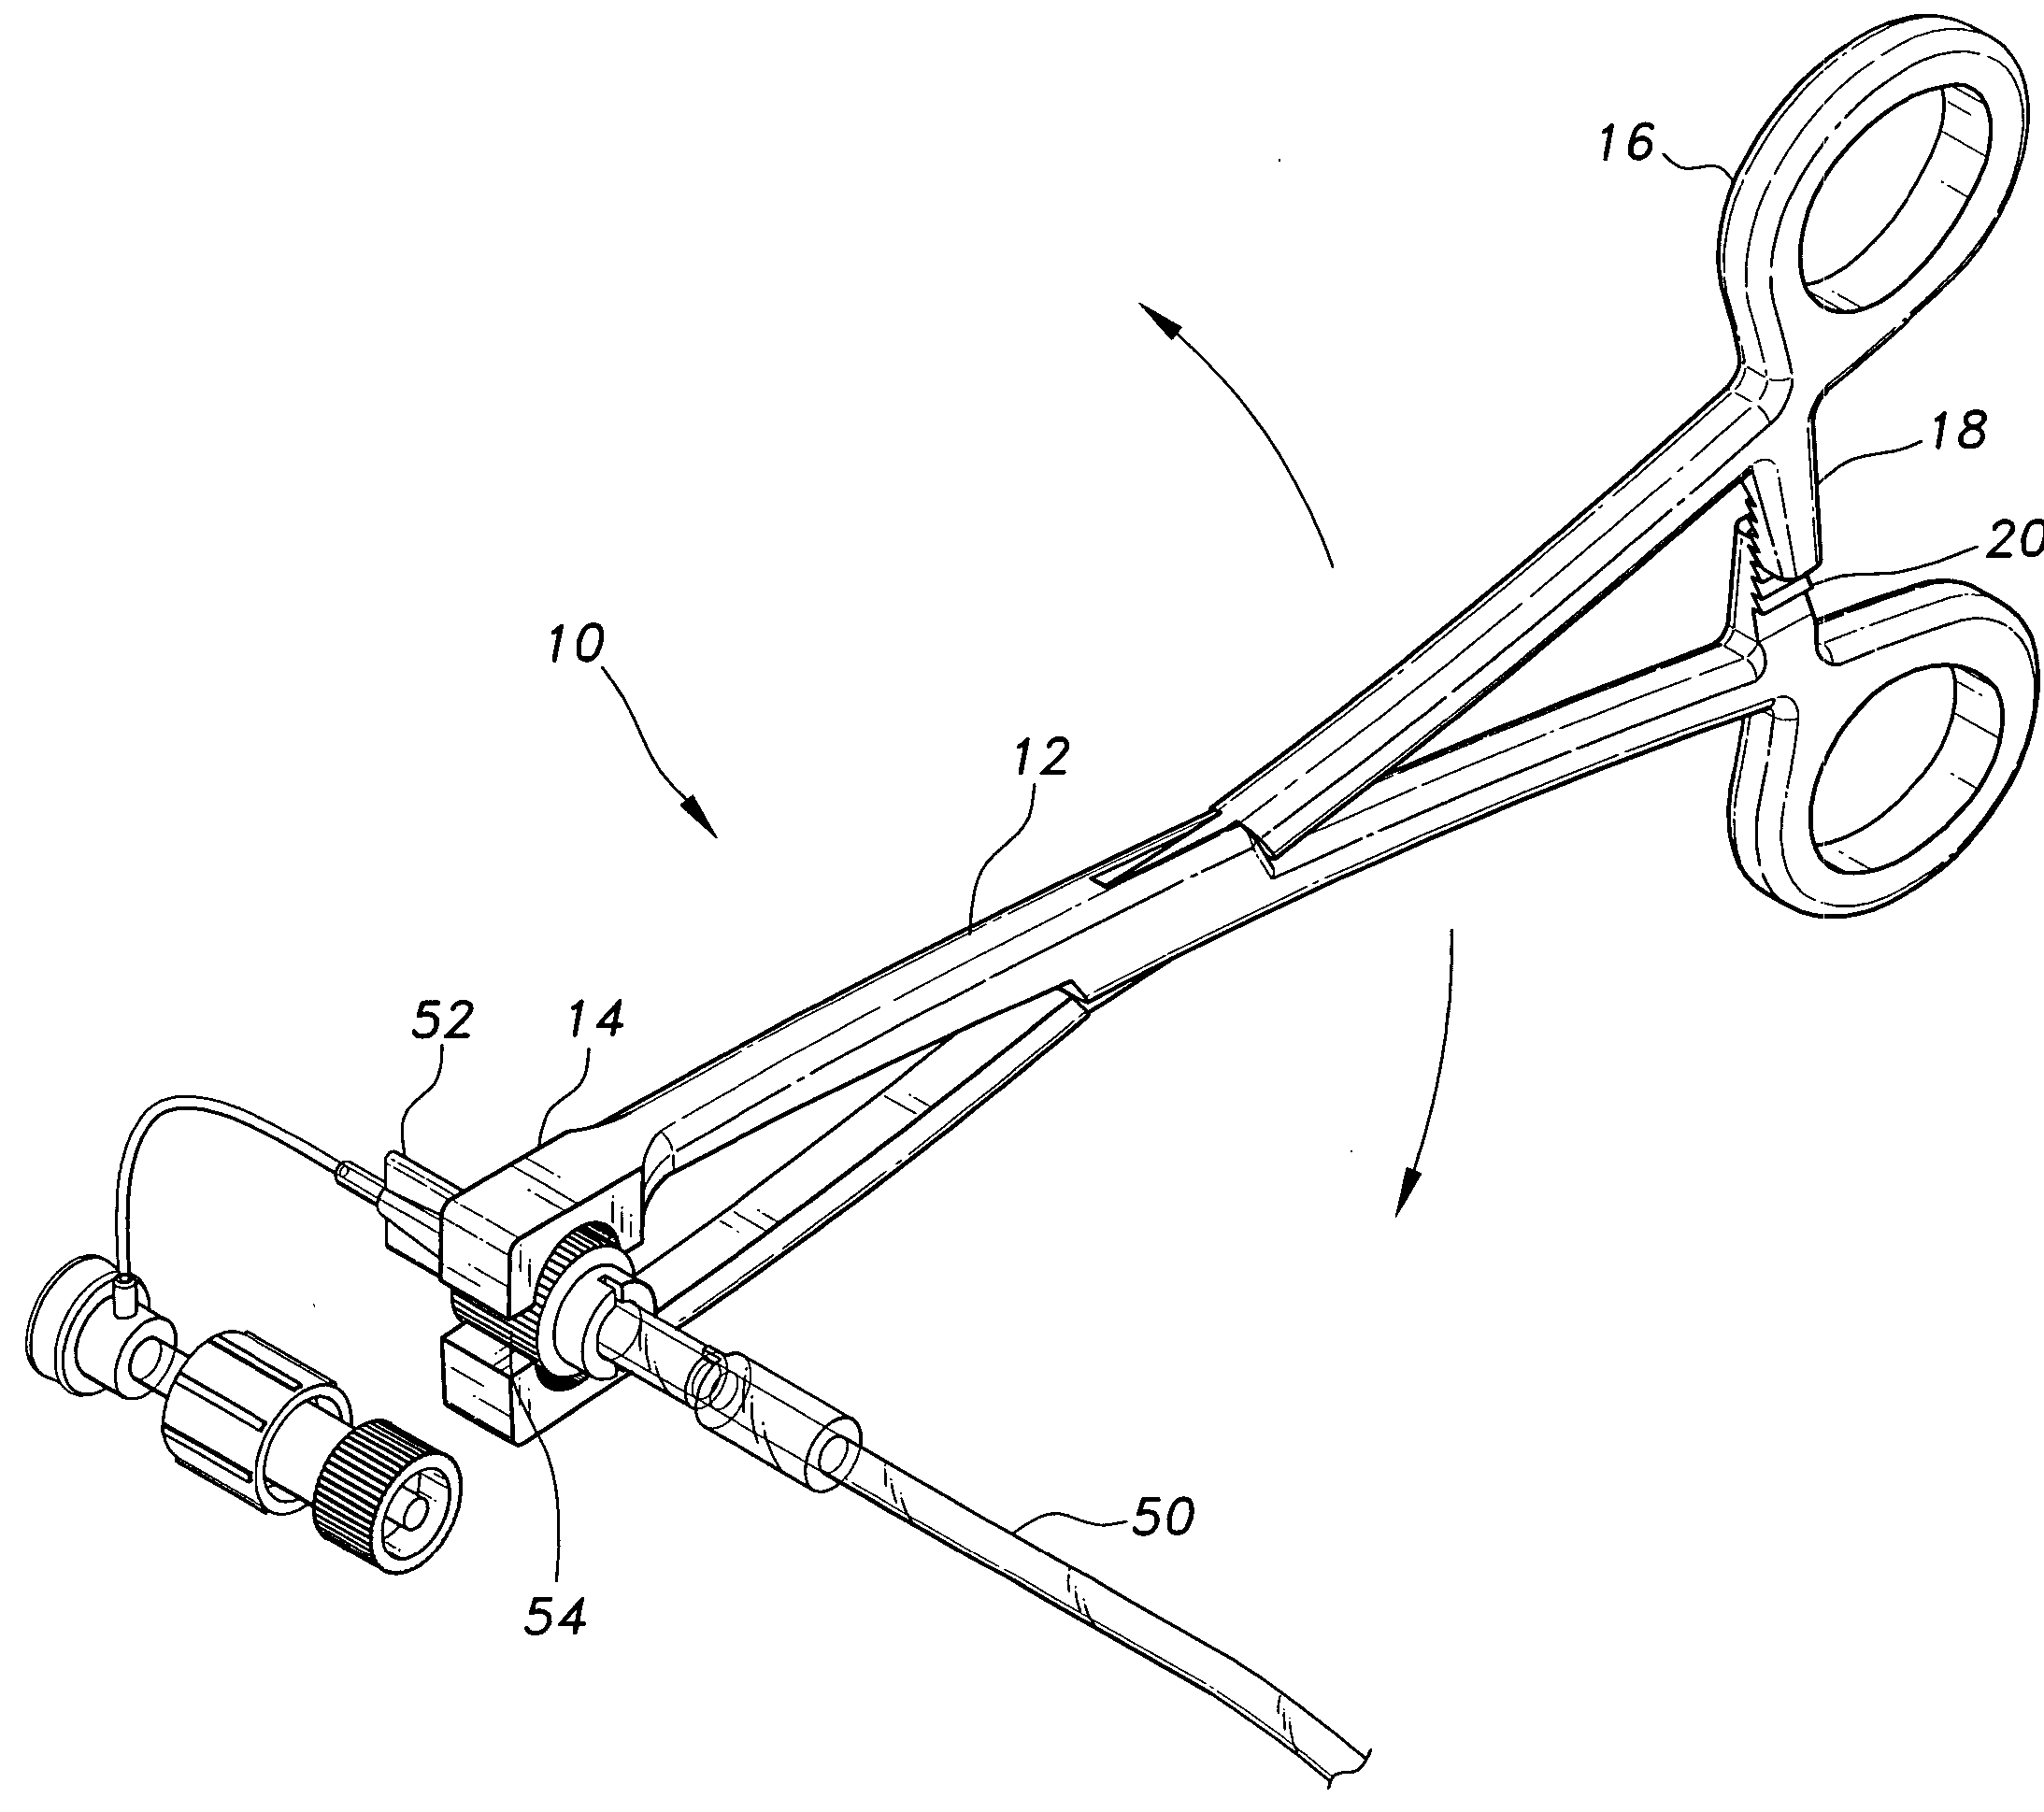 Medical device to remove hubs/ends of intravenous tubing